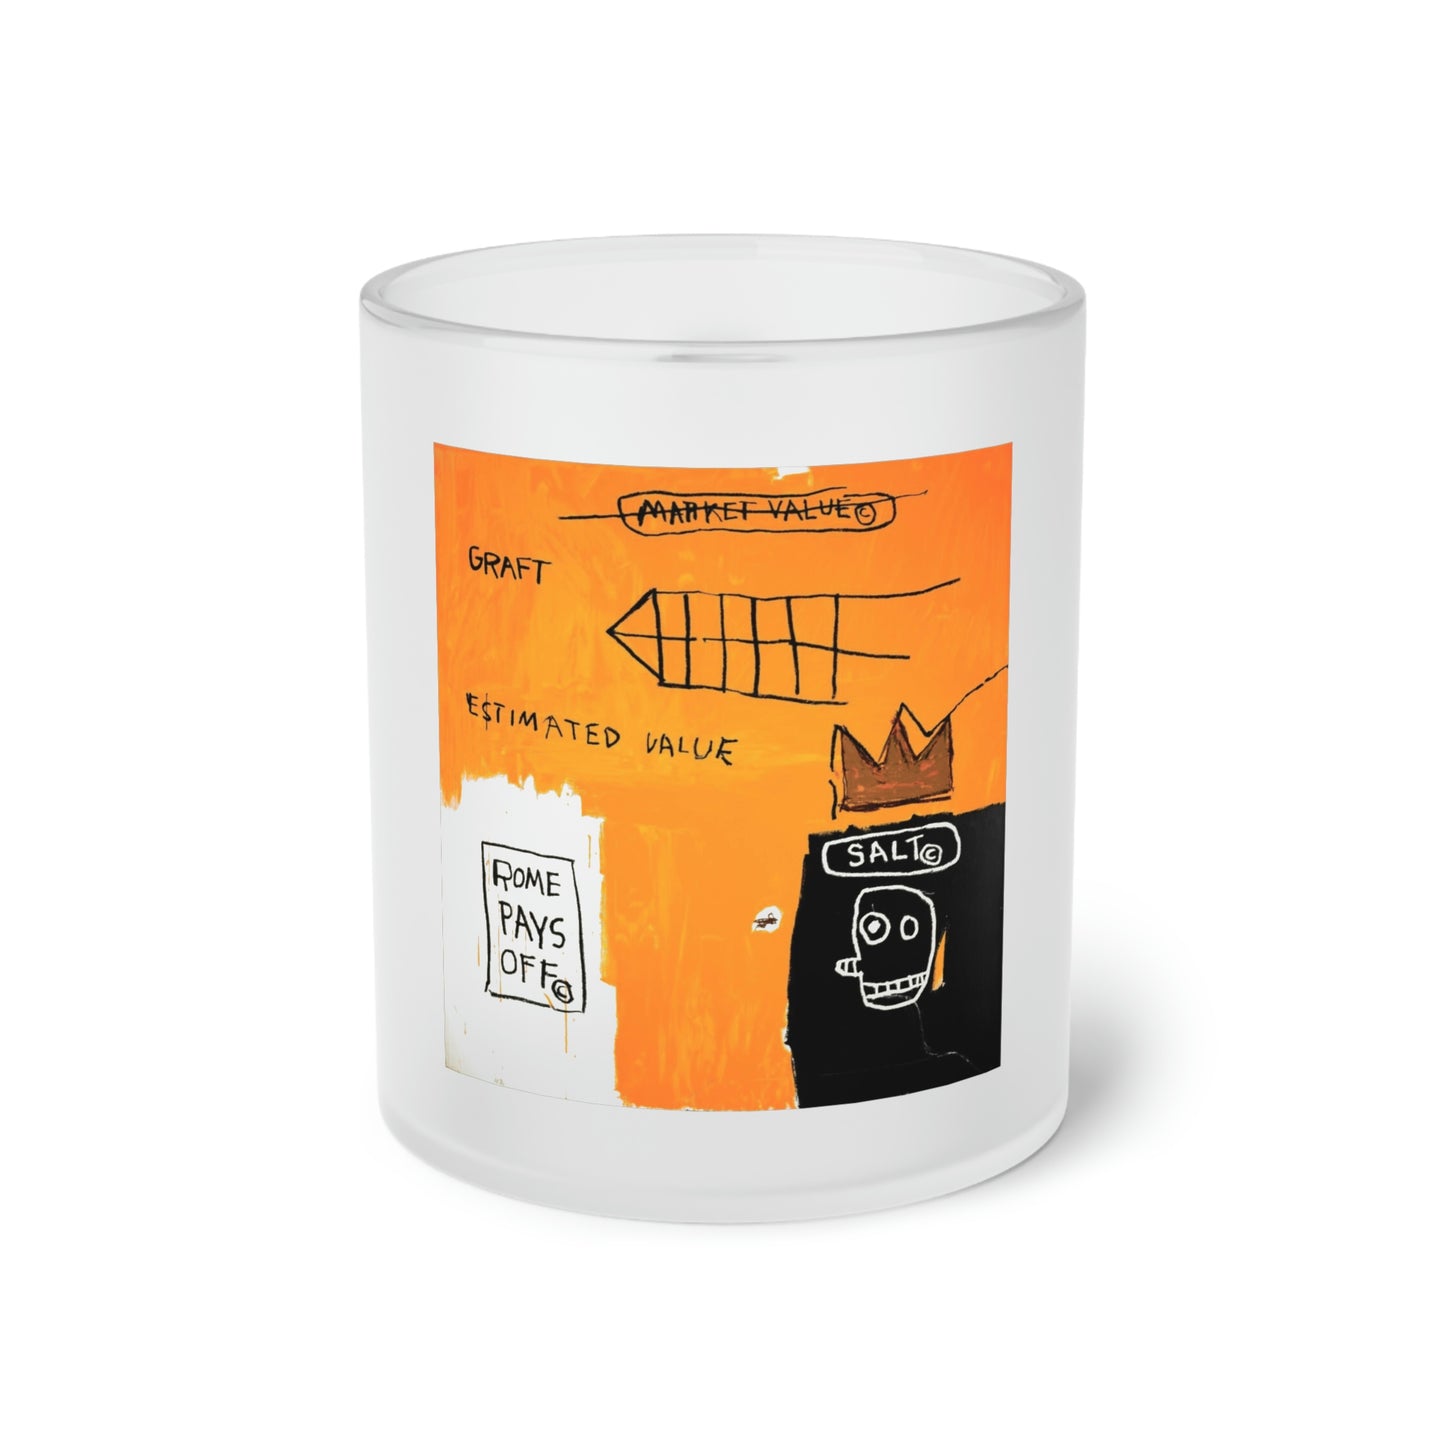 Jean-Michel Basquiat "Rome Pays Off" Frosted Glass Mug